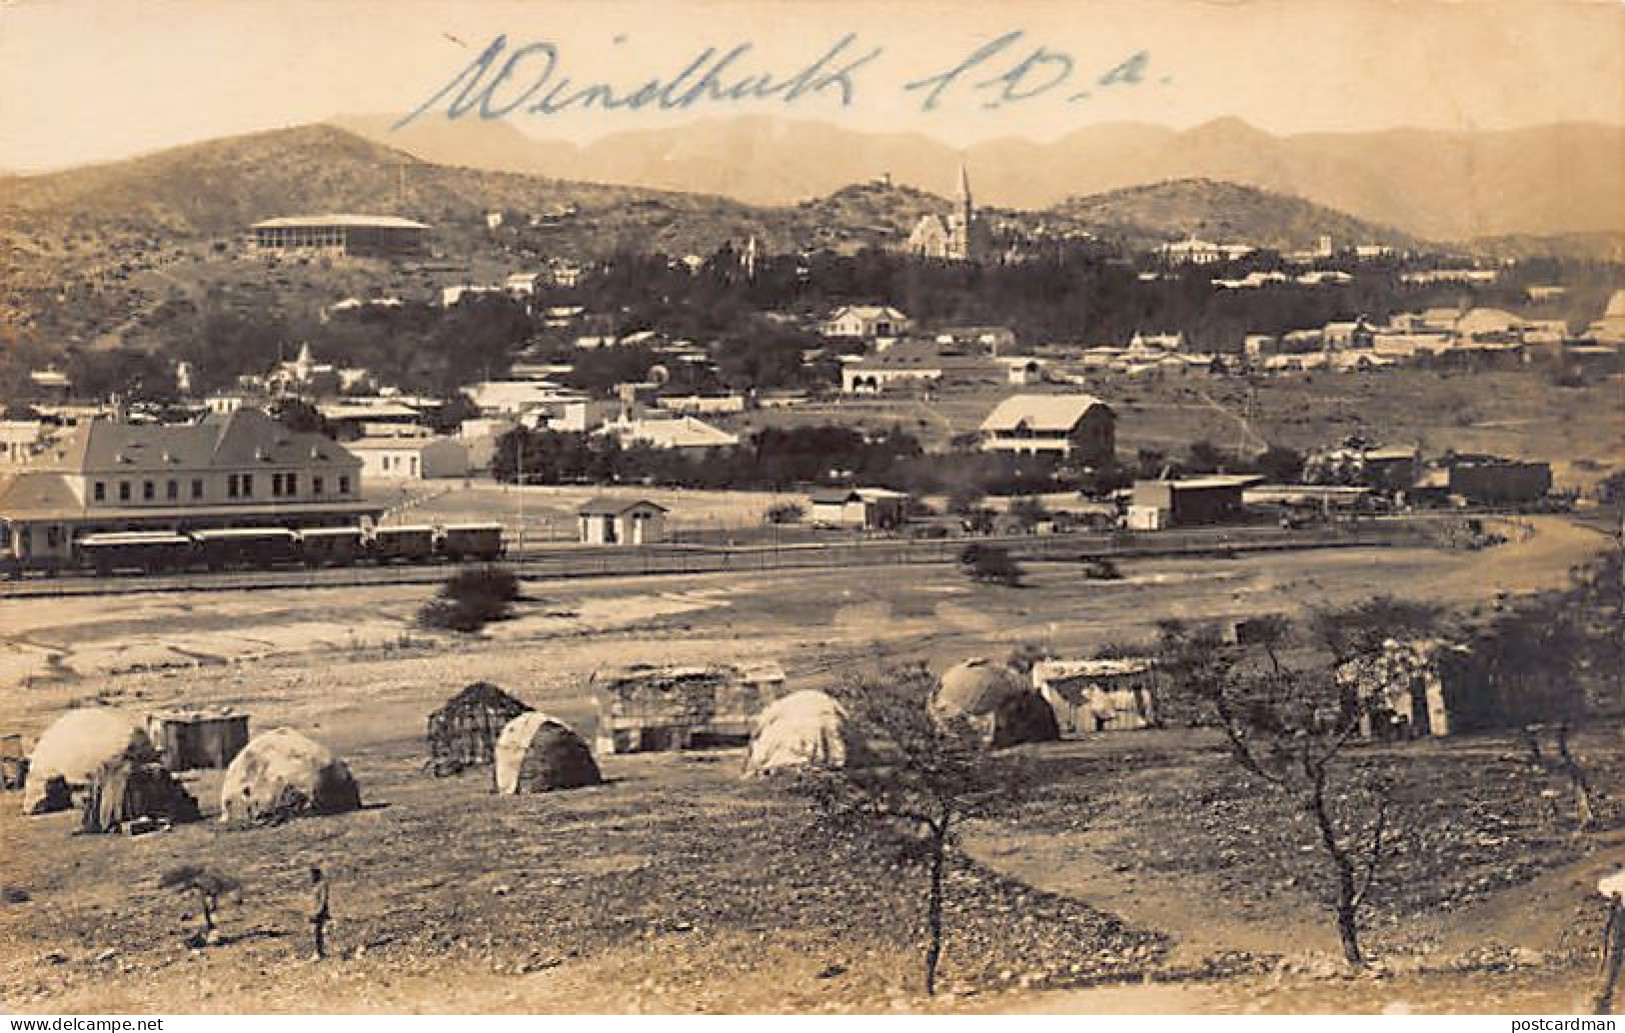 Namibia - WINDHOEK Windhuk - General View With The Railway Station - REAL PHOTO - Publ. F. Nink  - Namibia